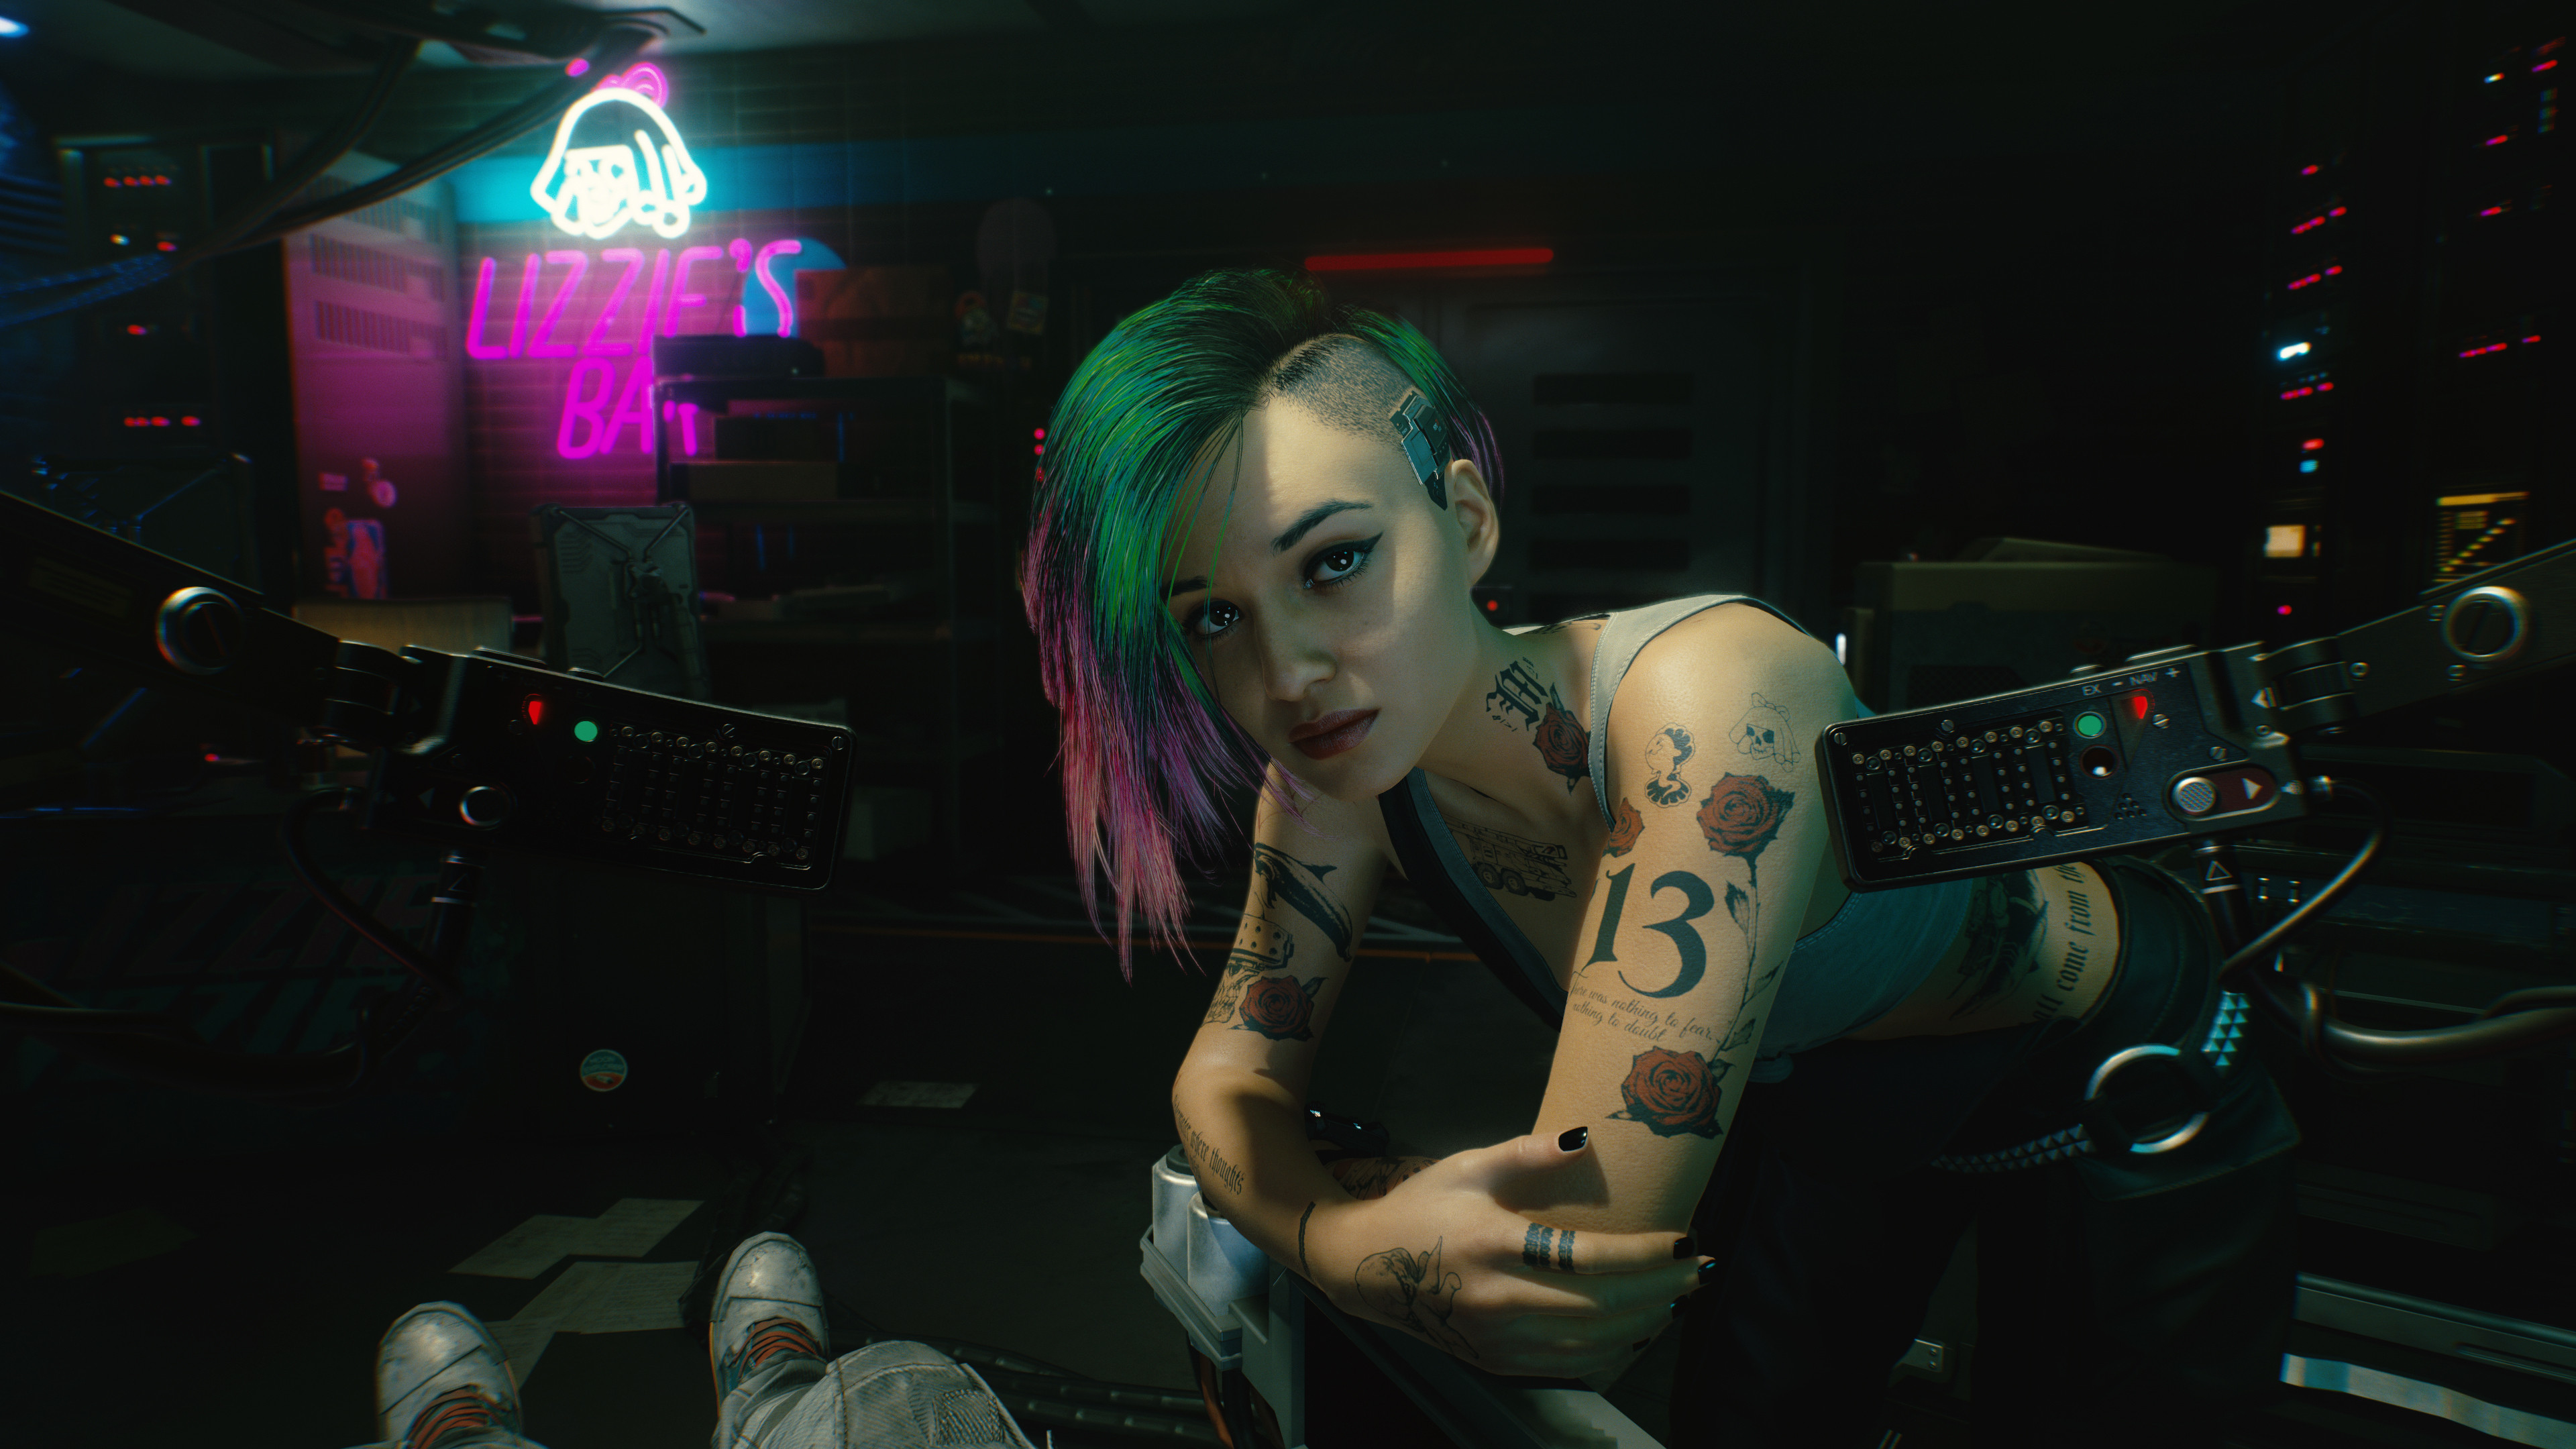 Cyberpunk 2077 Art 2020 4k Wallpaper,HD Games Wallpapers,4k Wallpapers ,Images,Backgrounds,Photos and Pictures